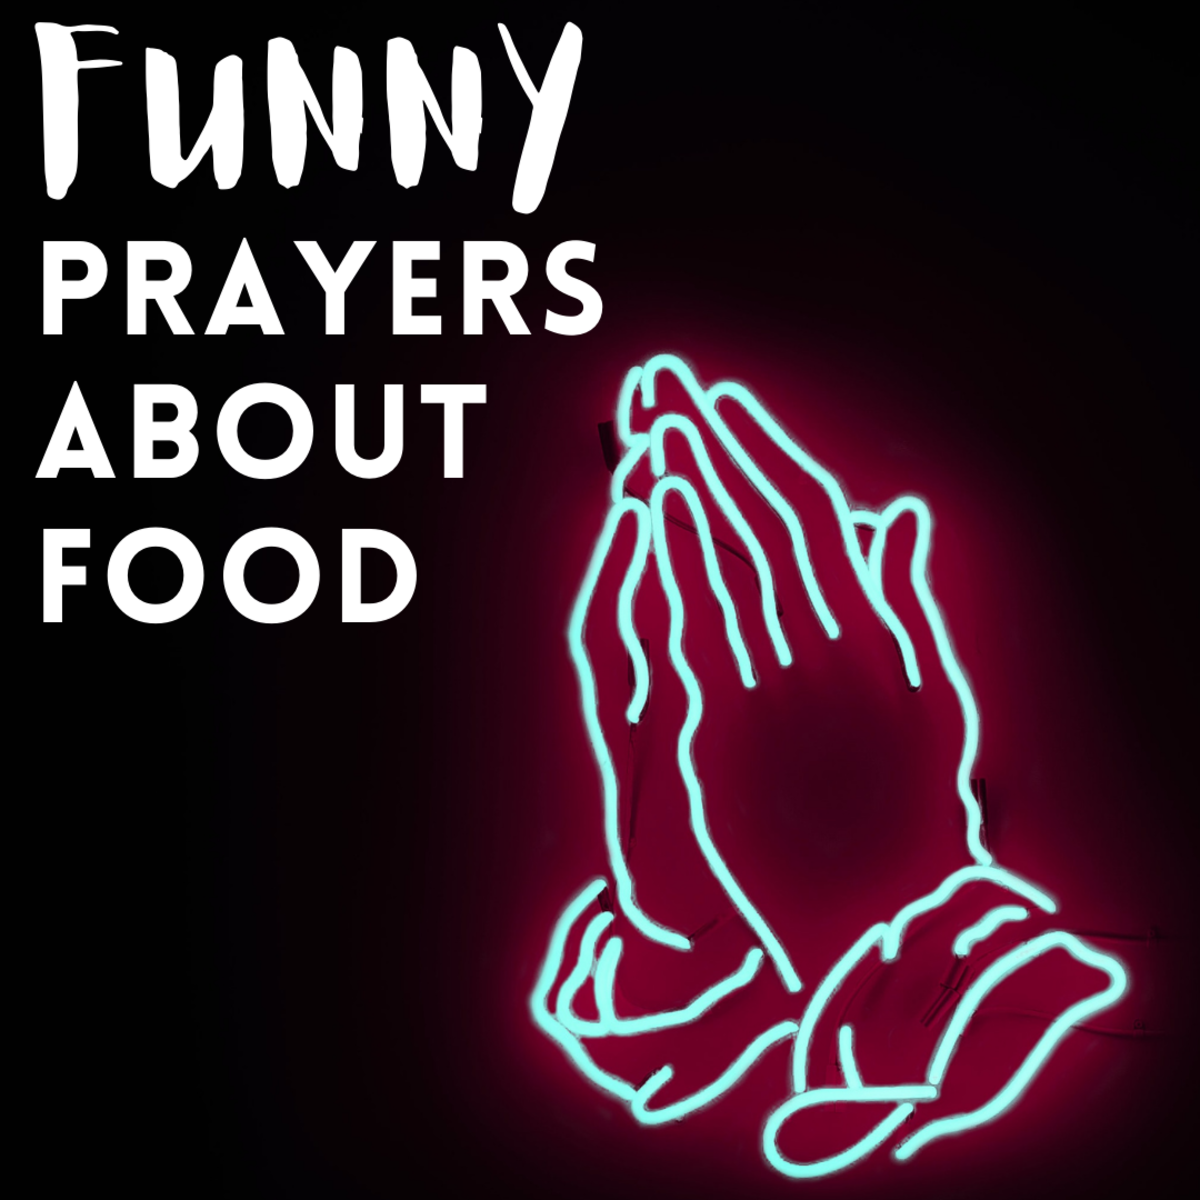 These prayers show thanks for your food in a way that's sure to get a few laughs at the table.